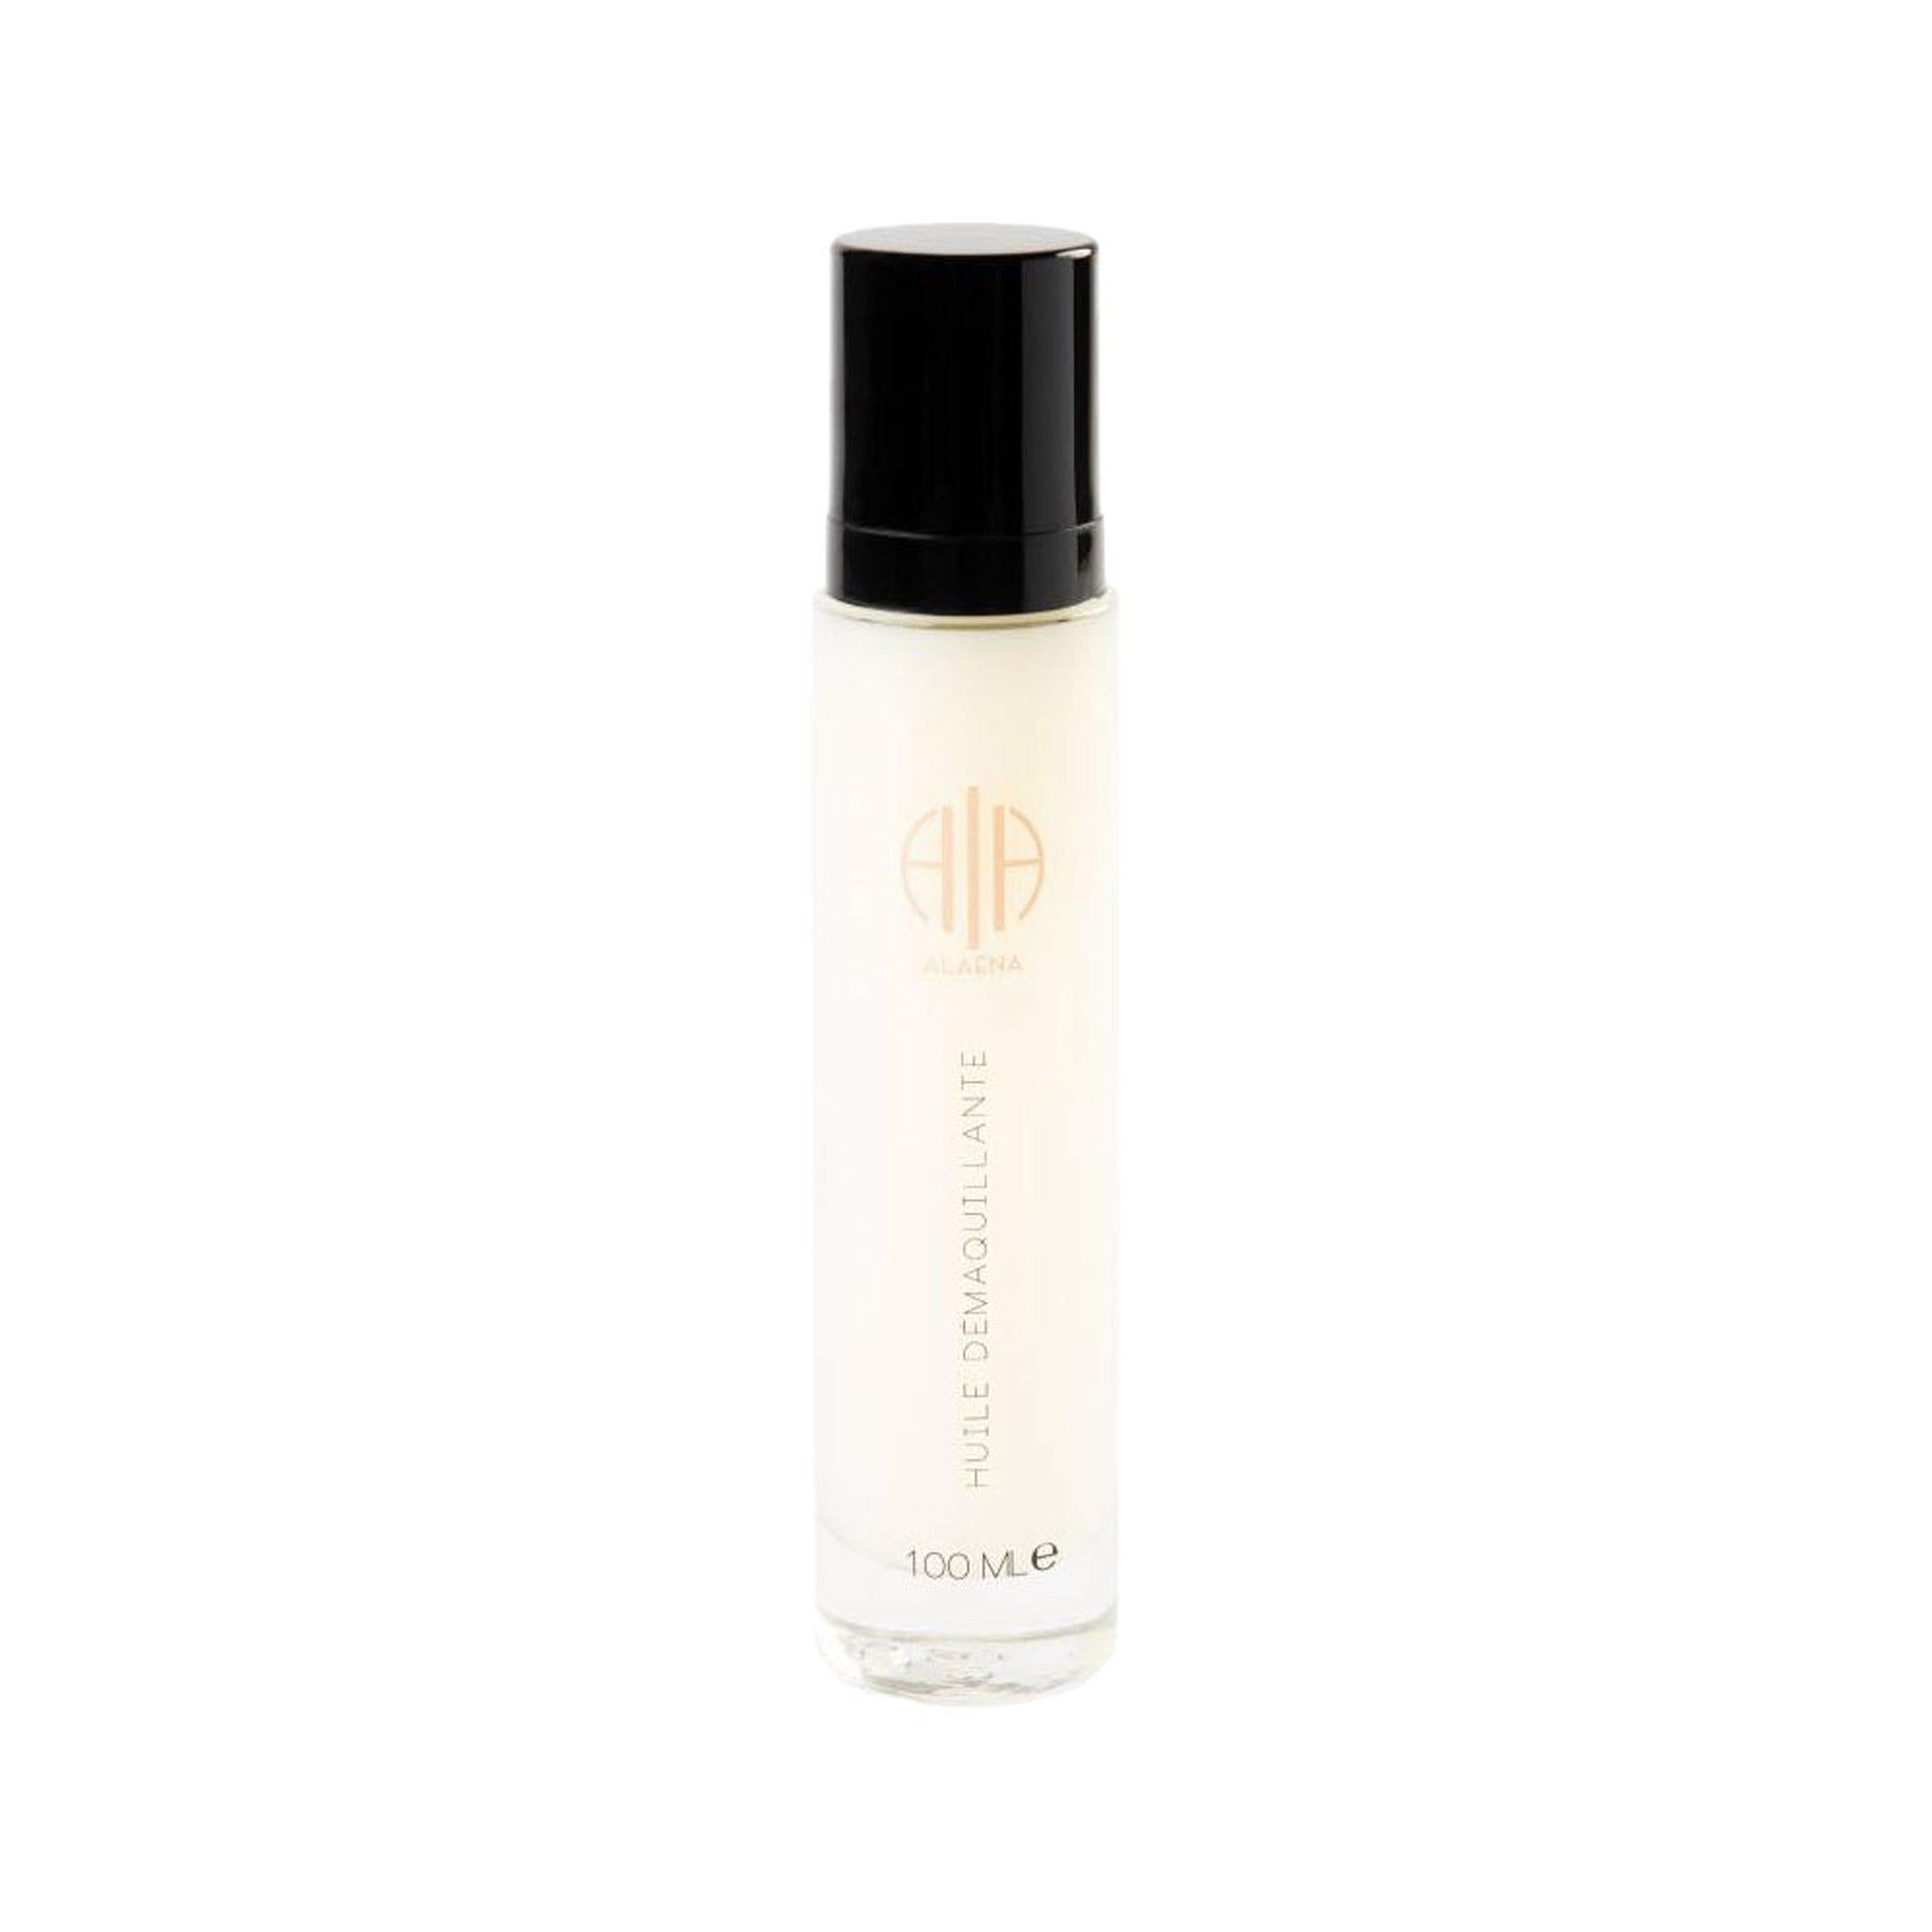 Indisponible : Huile Démaquillante Unavailable: Cleansing Oil - Alaena